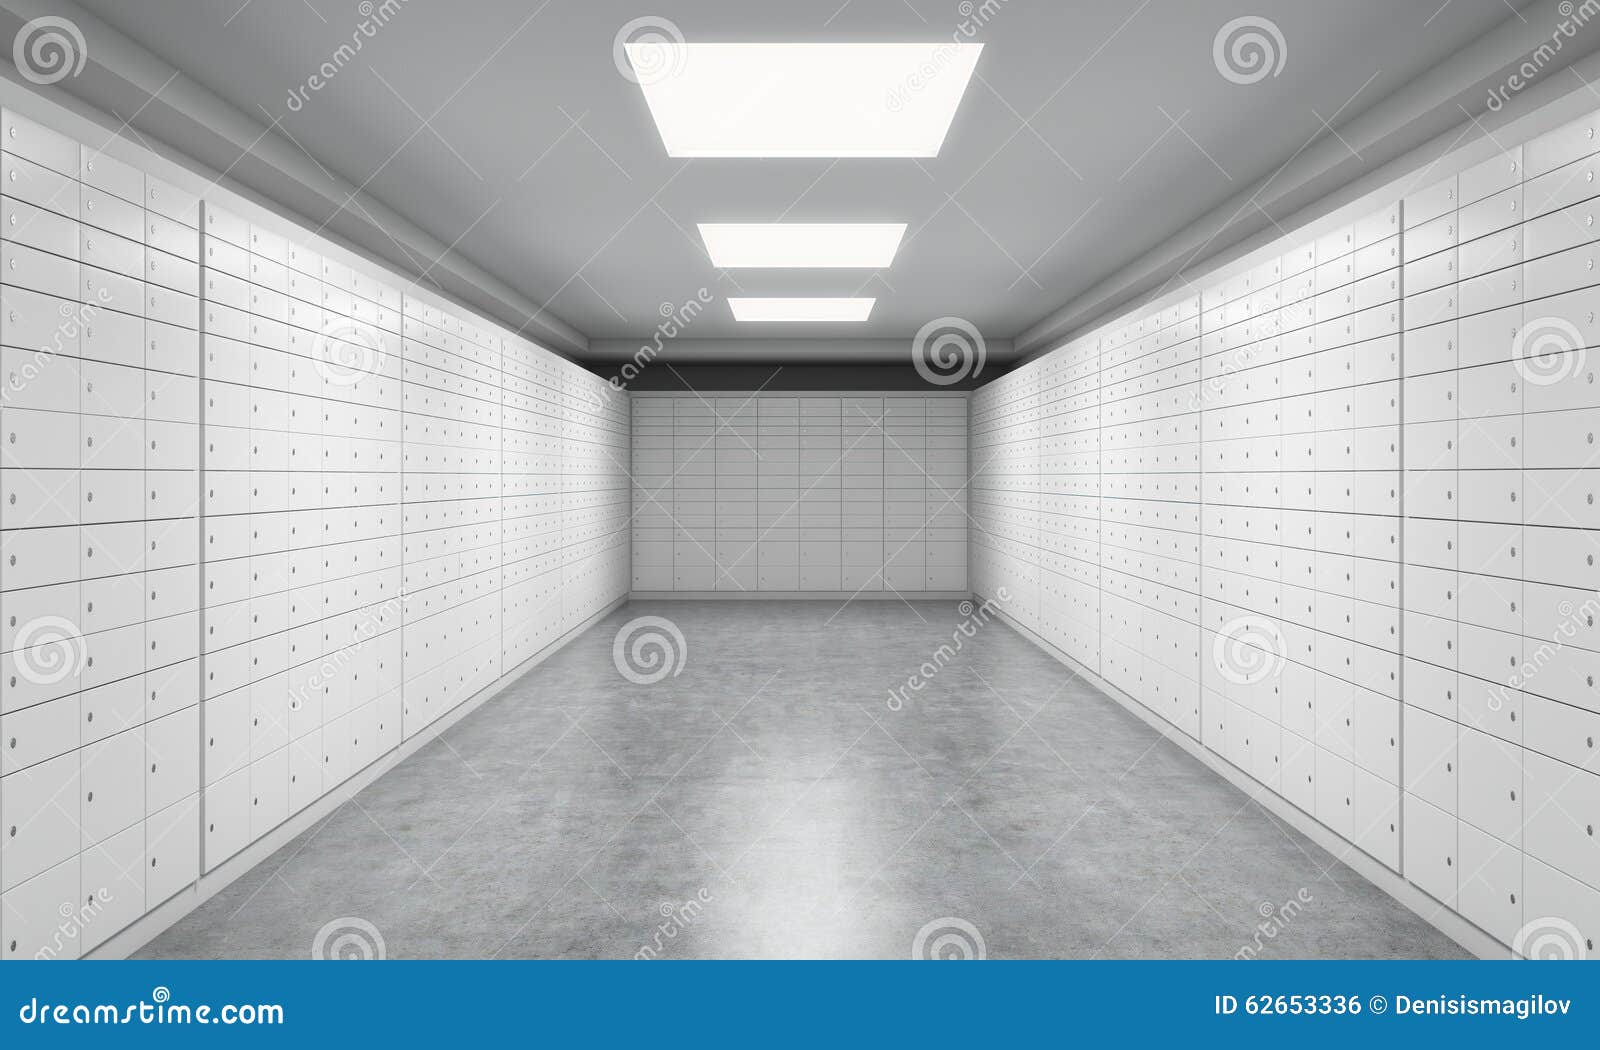 A Bright Space With Safe Deposit Boxes. A Concept Of ...